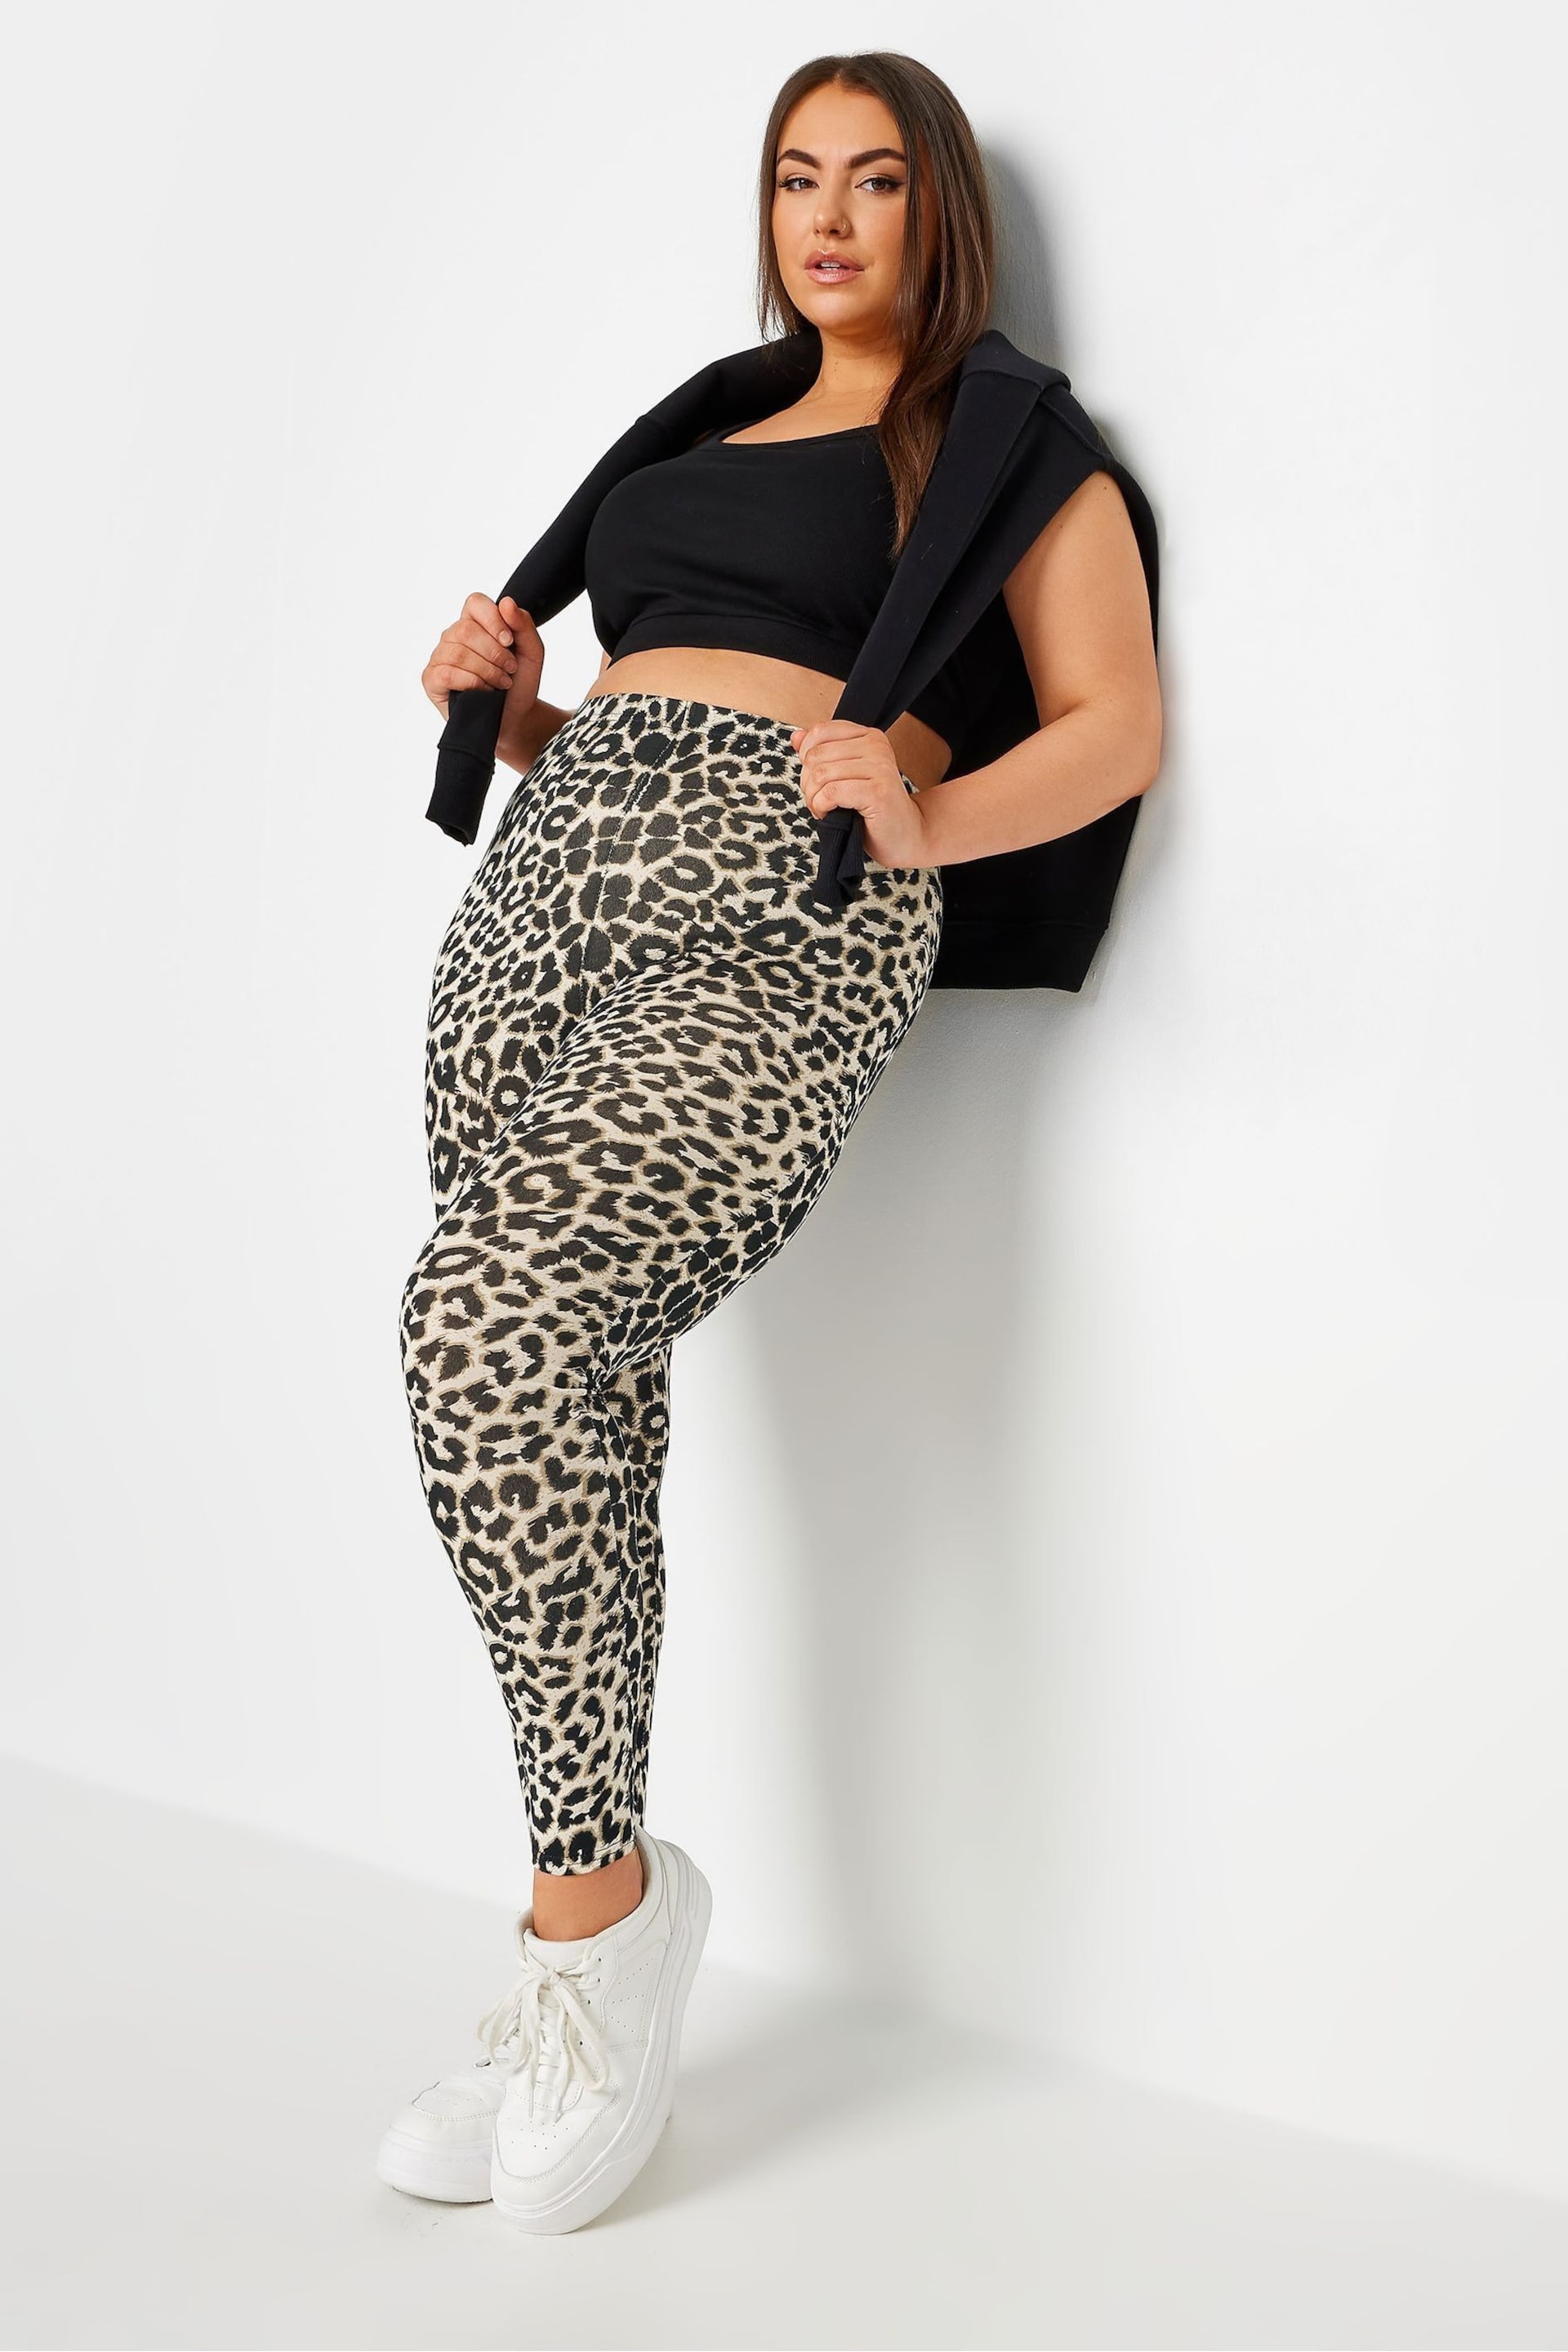 Yours Curve Black Limited Leopard Print Leggings - Image 2 of 5